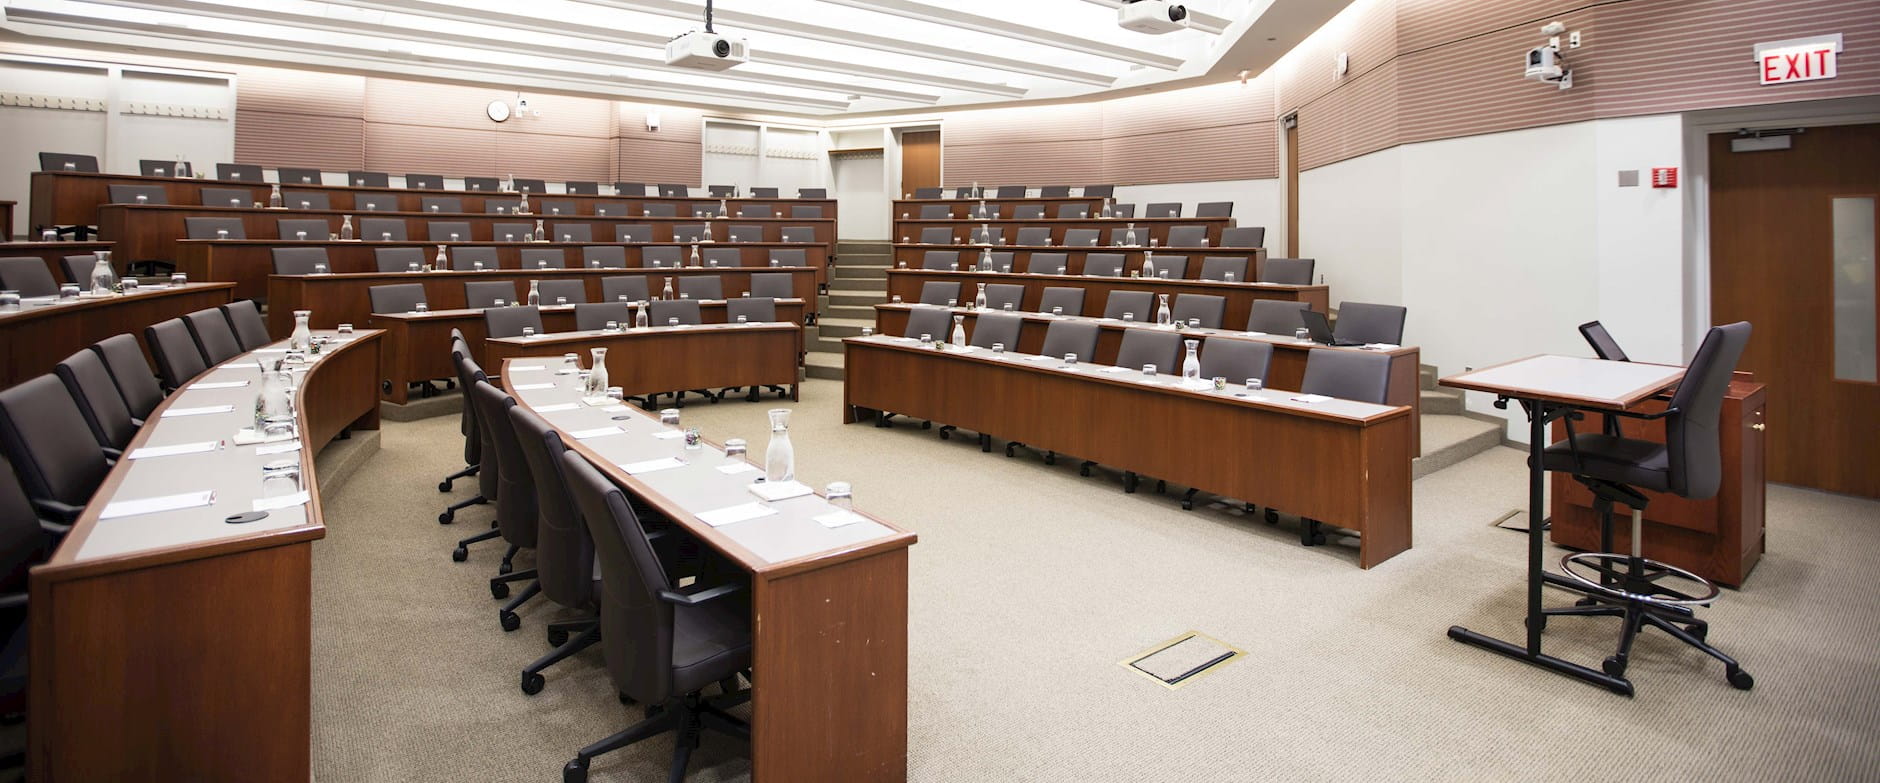 View from the front-left of room 100 at the Gleacher Center showing tiered tables and chairs in a semi-circle with a podium and presenter's seat at the front